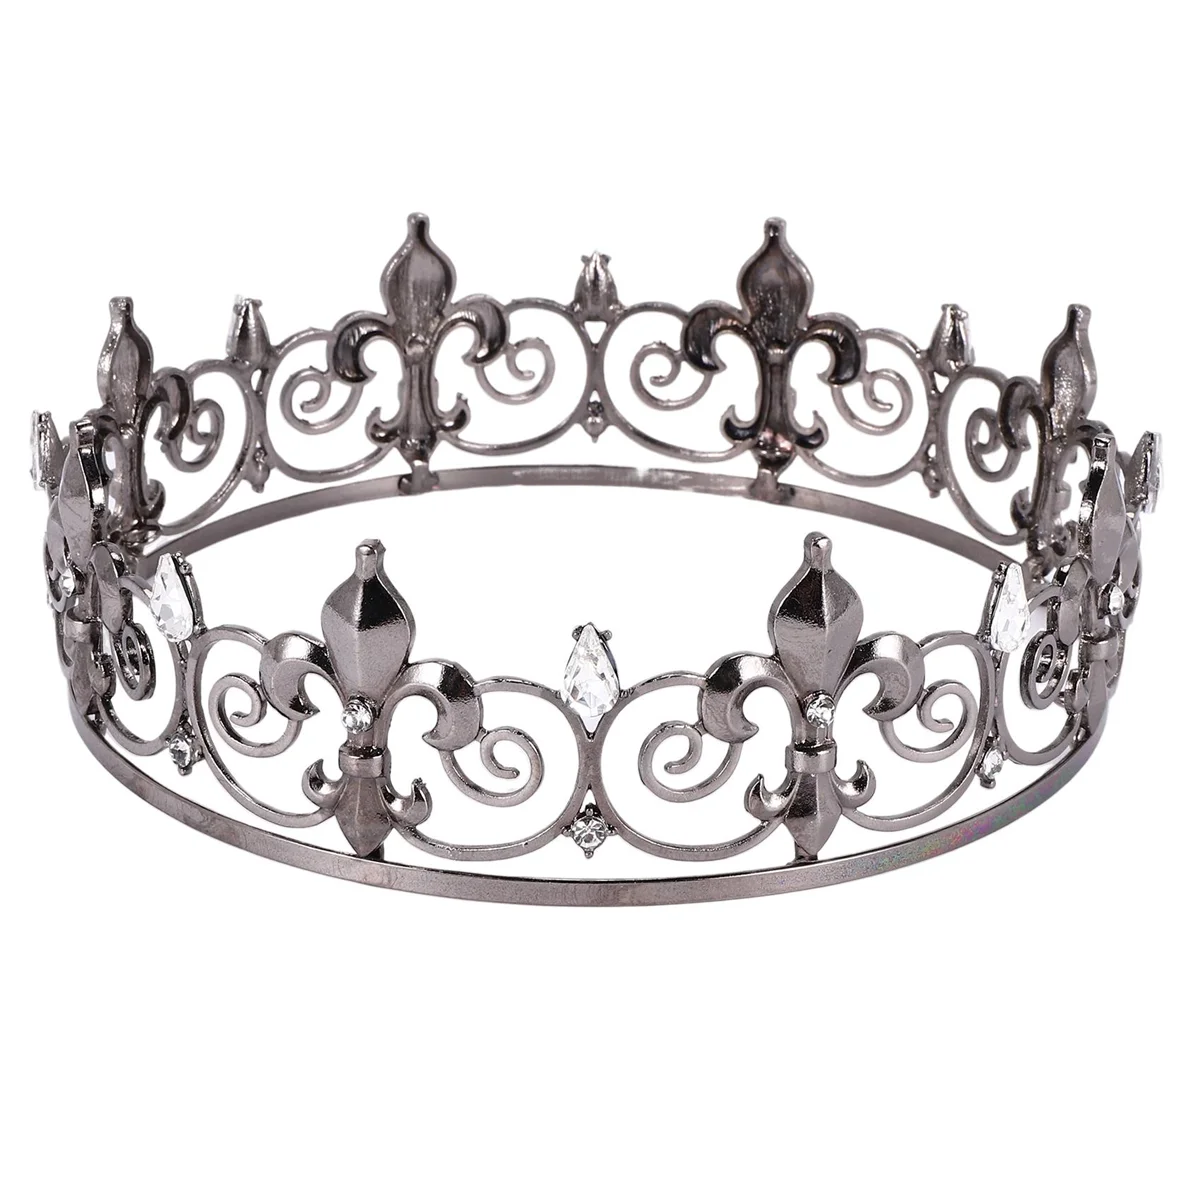 

Gothic Full King Crown - Metal Crowns and Tiaras for Men & Boys, Goth Prince Prom Party Hats, Halloween Cosplay Costume